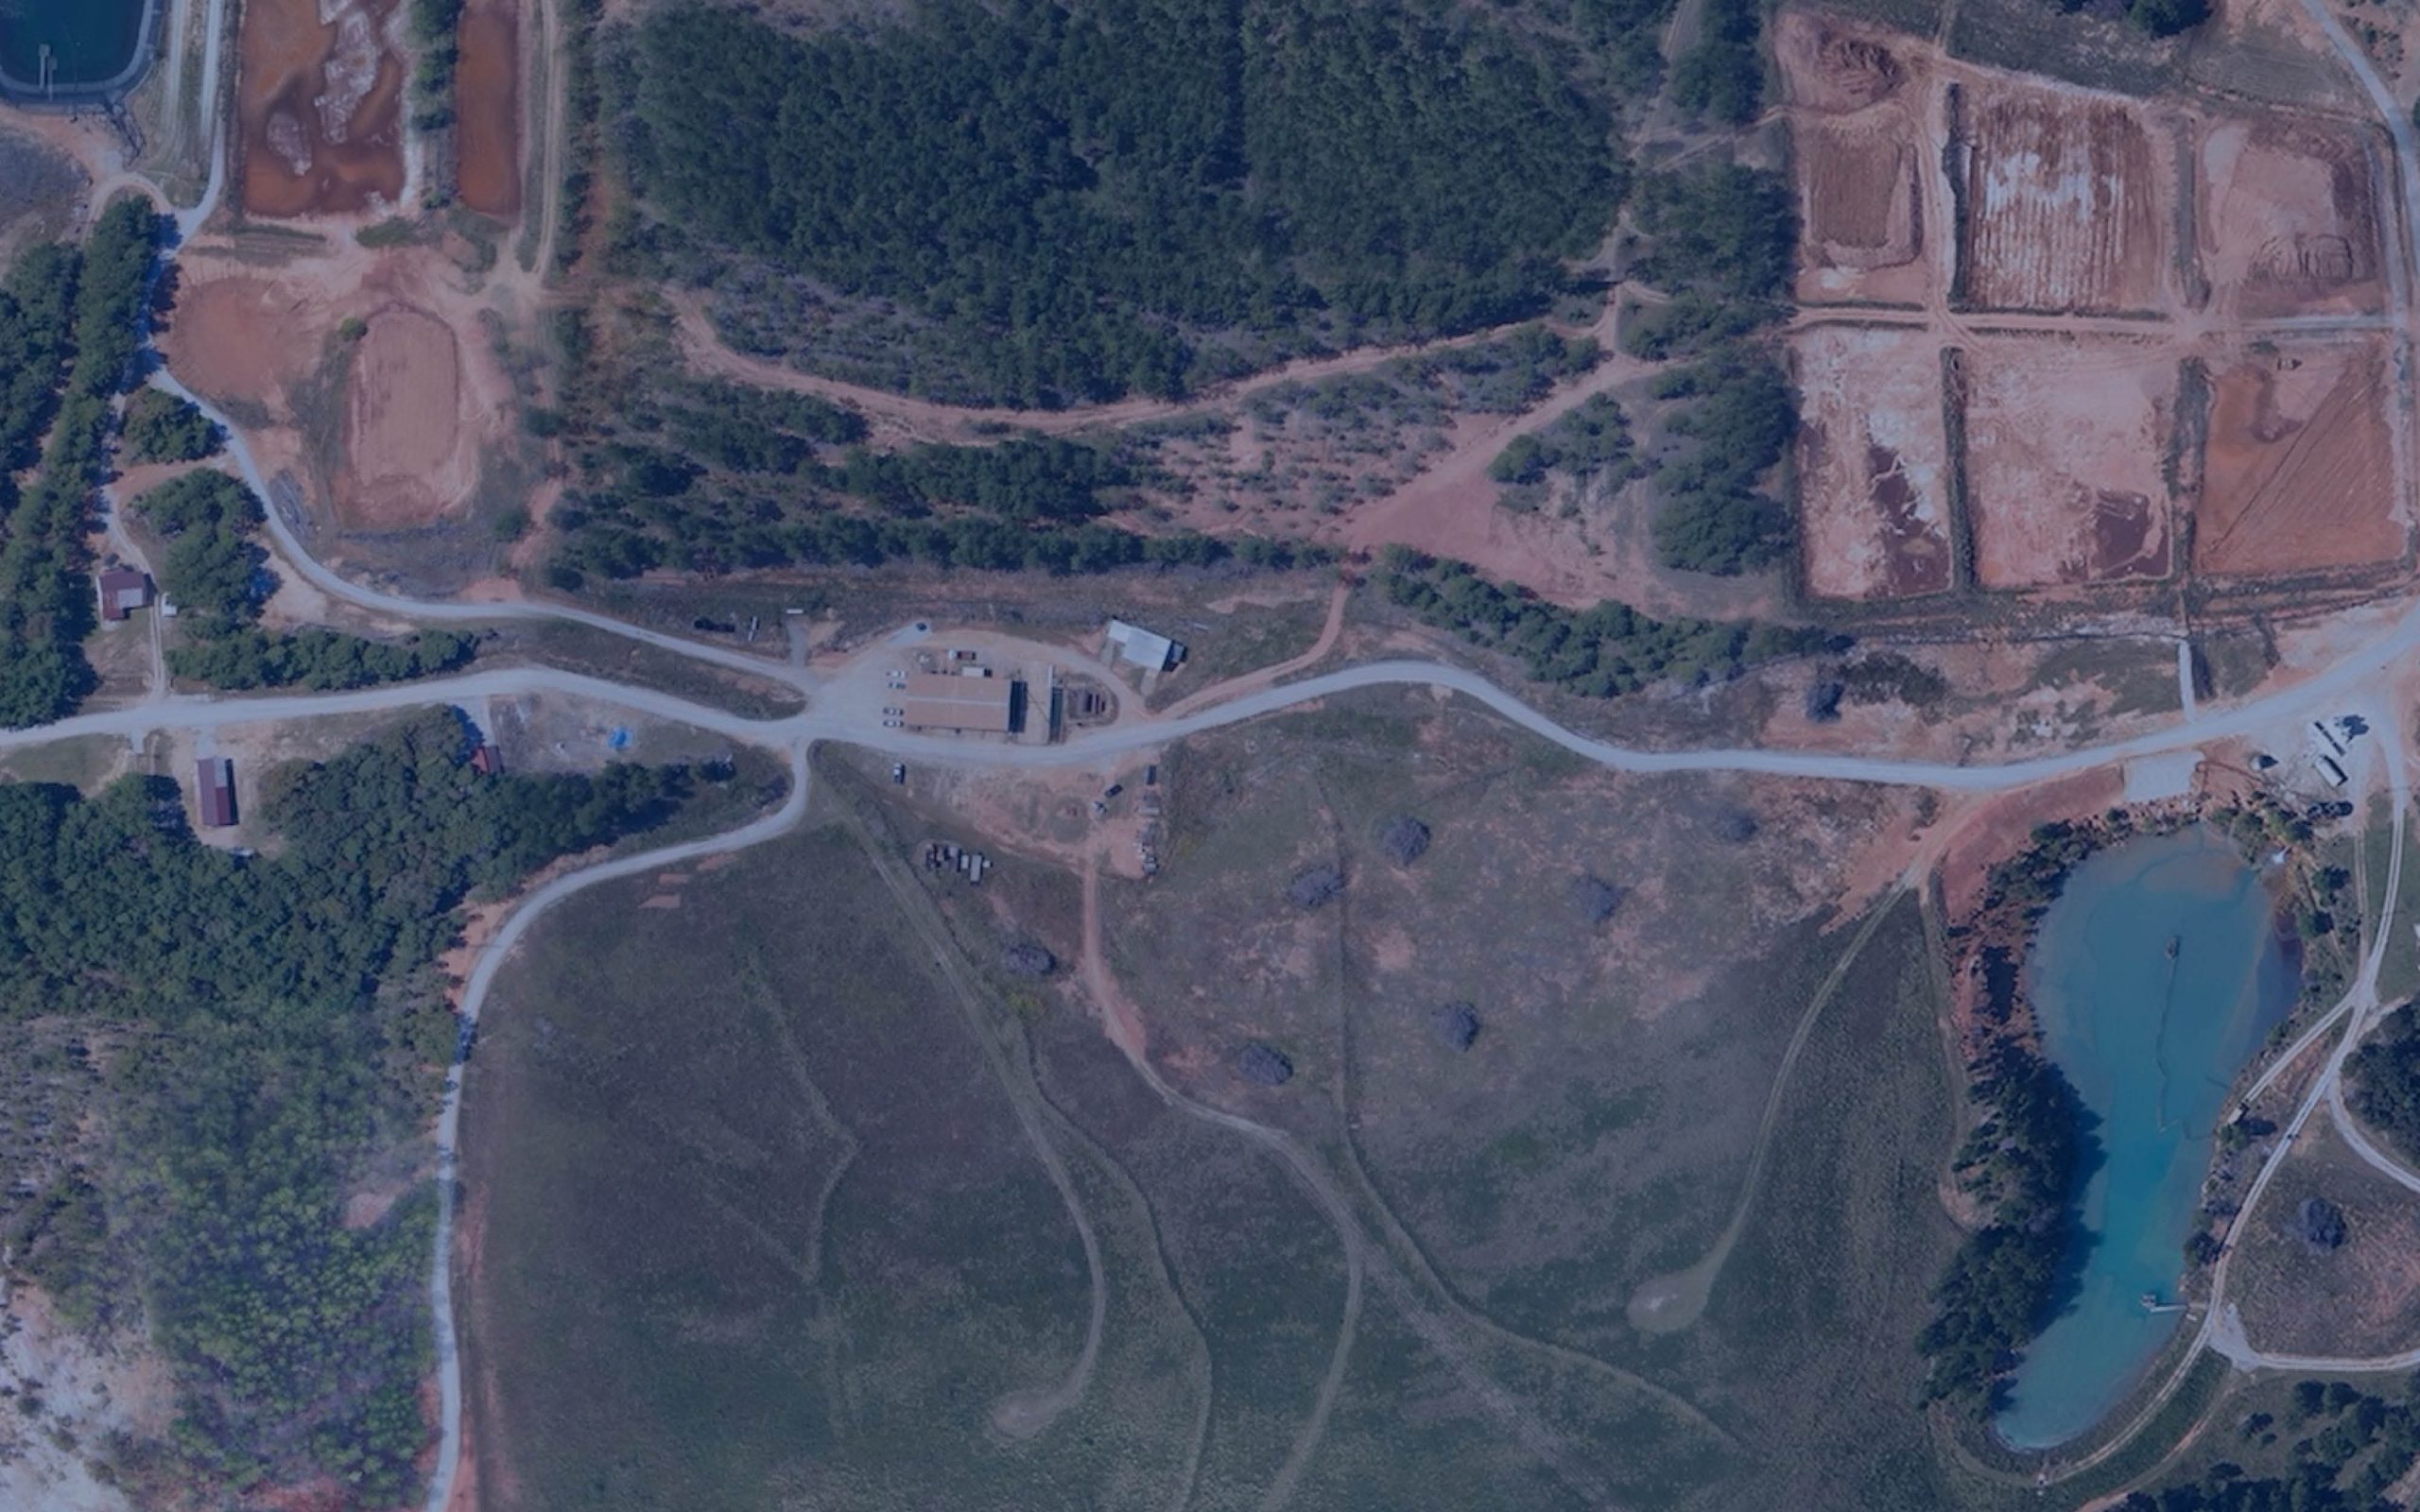 Arial view of a mine and the surrounding area